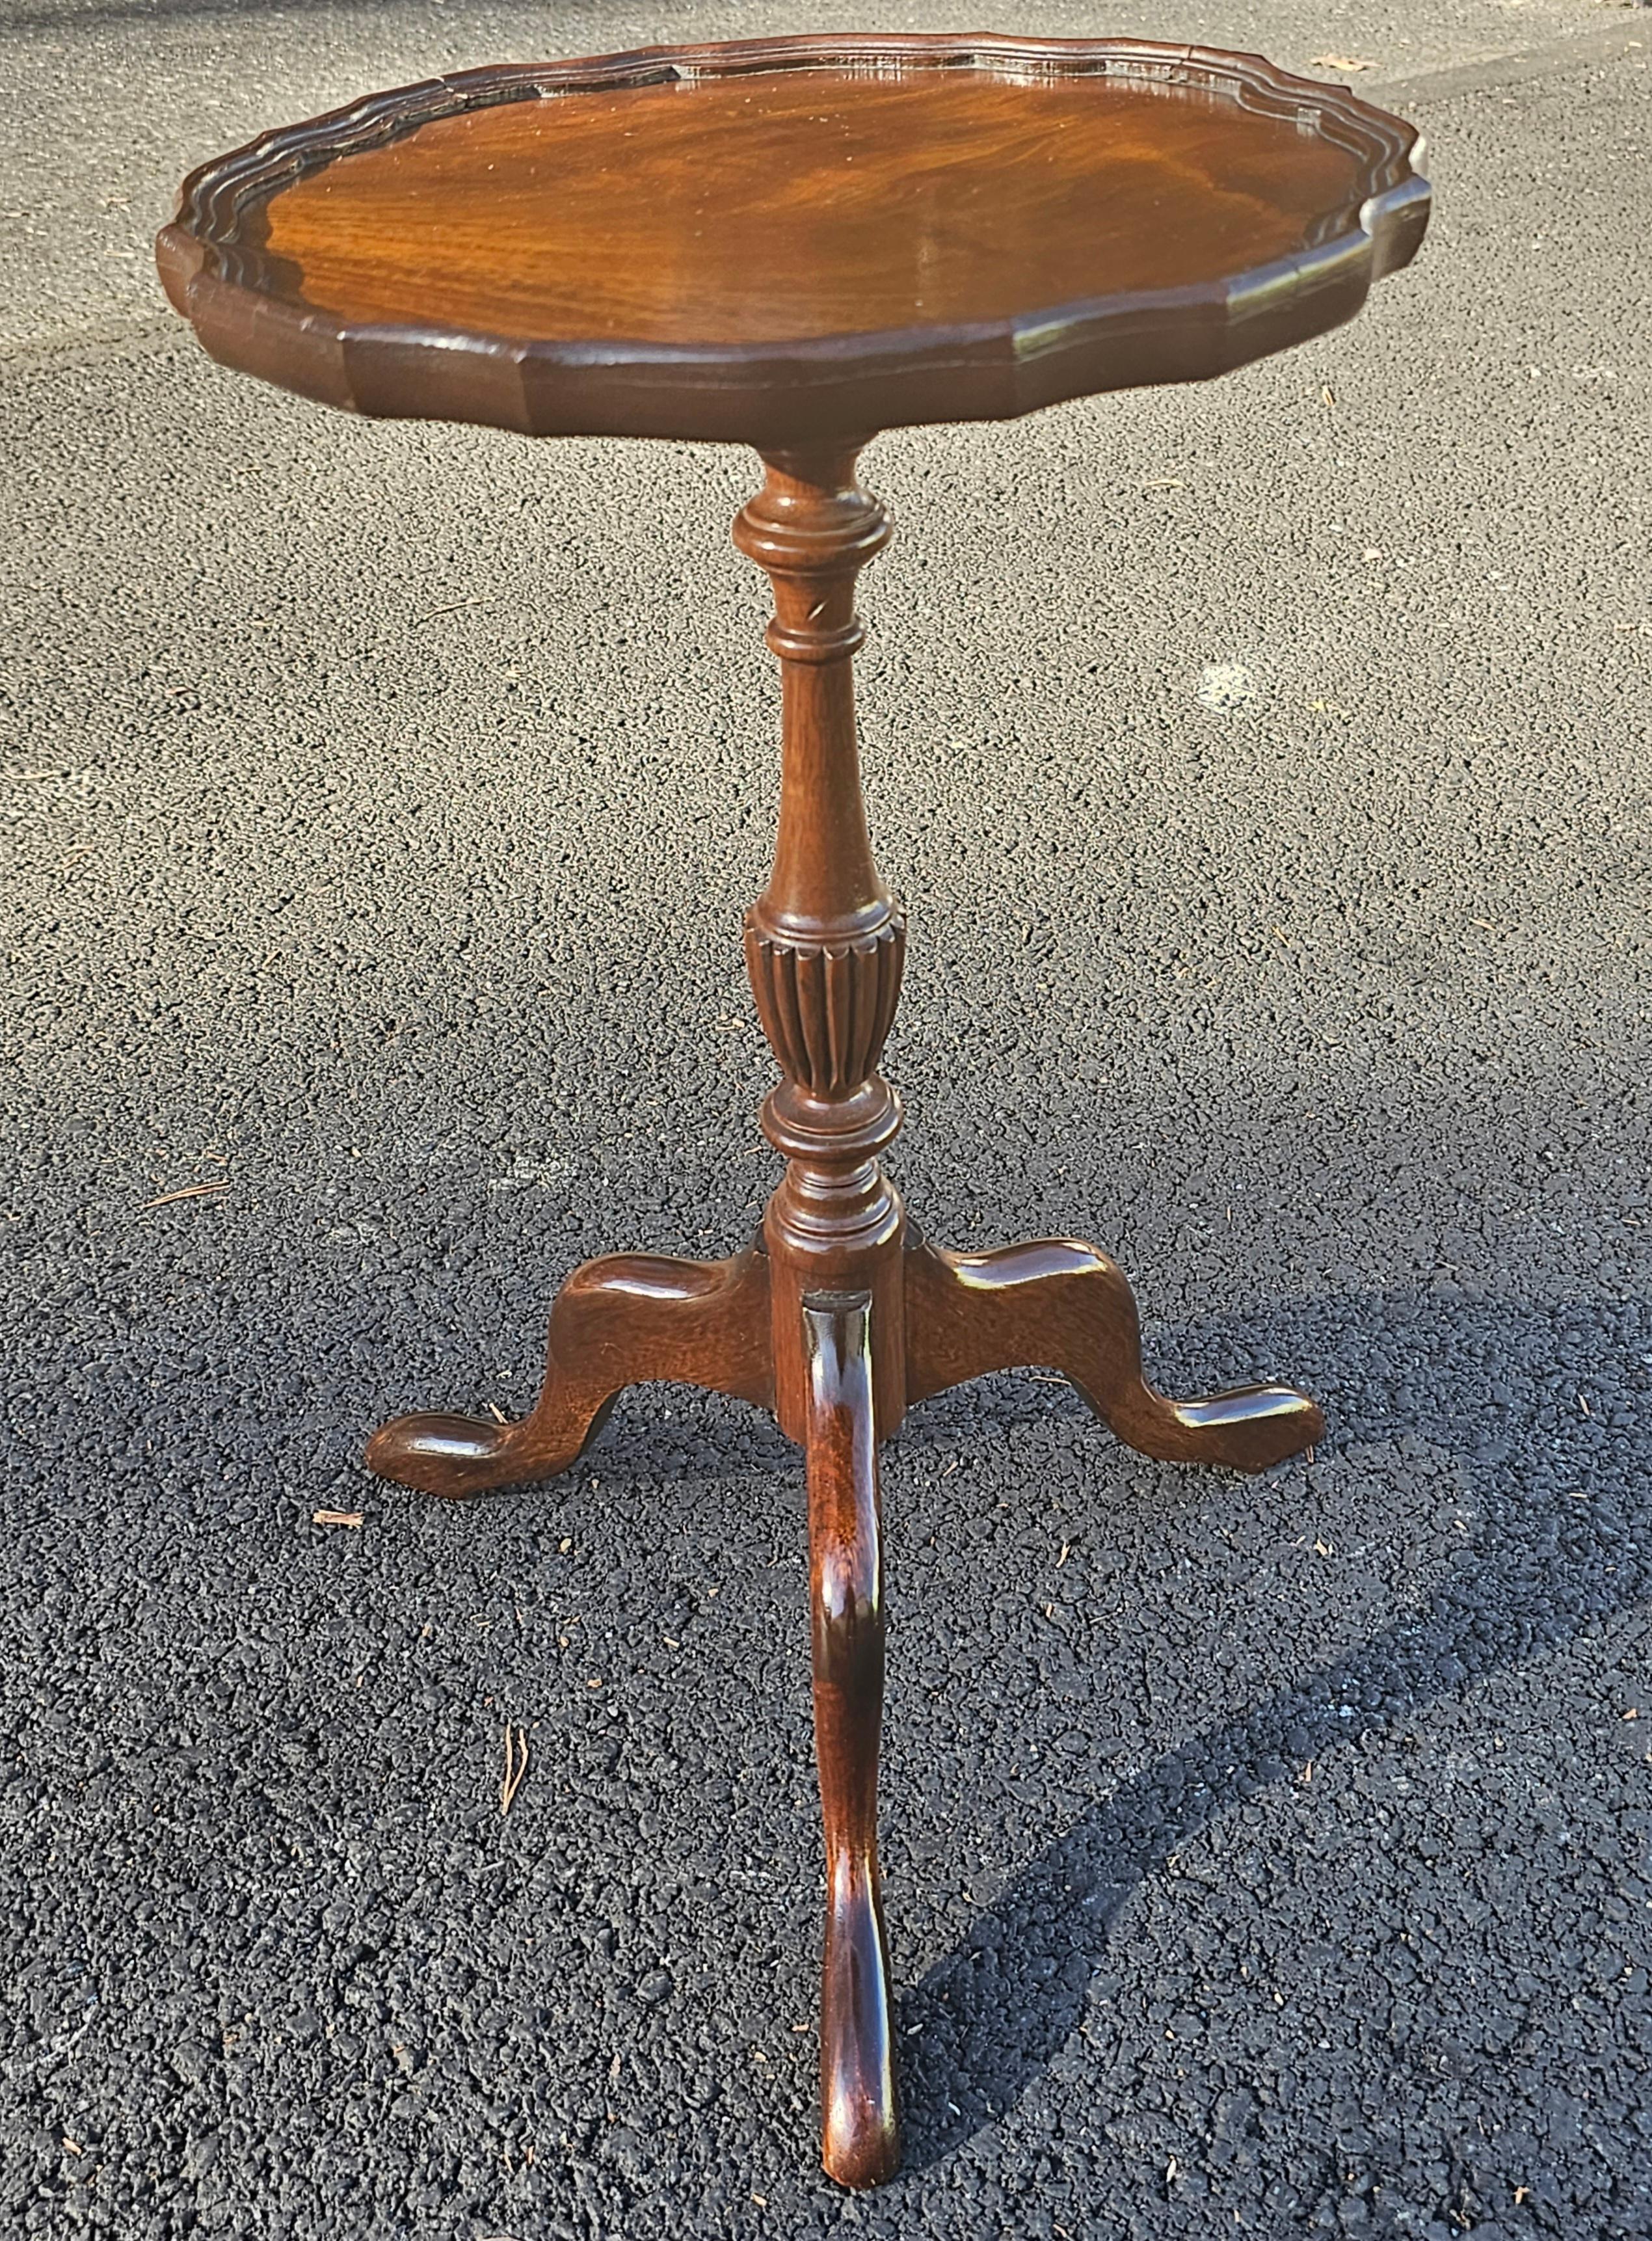 An Early 20th Century Refinished Solid Mahogany Pedestal Tripod Pie Crust Candle Stand with Snake Feet. 
Measures 12